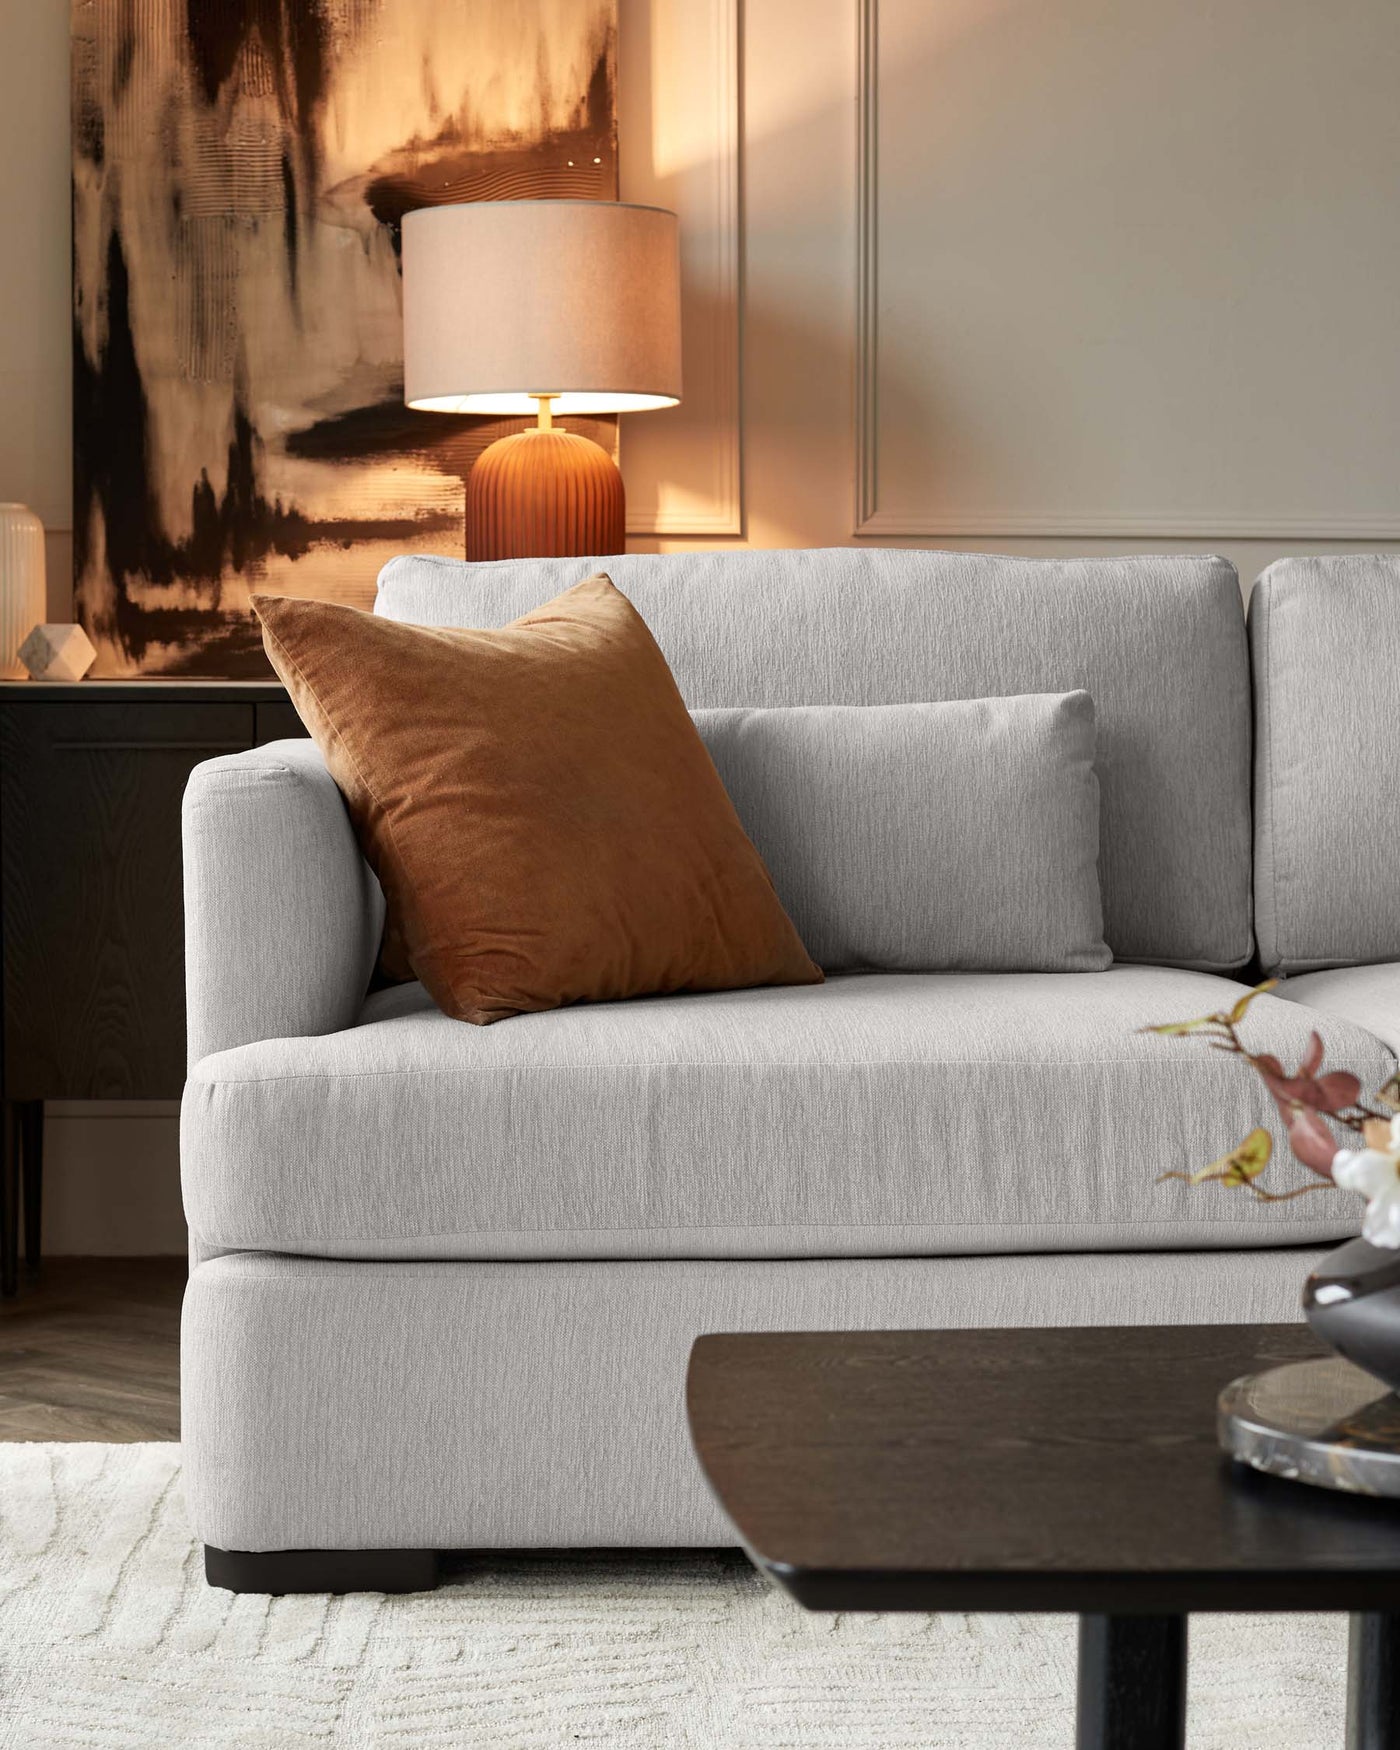 A contemporary living room setting featuring a light grey fabric sofa with clean lines and plush cushions. The sofa is adorned with one terracotta-coloured throw pillow. In the foreground, a dark wooden coffee table with a rounded triangular shape provides contrast. Behind the sofa, a stylish table lamp with a ribbed ceramic base and a beige shade creates a warm ambiance. The furniture arrangement is placed on a textured off-white area rug, giving the space a cosy and inviting feel.